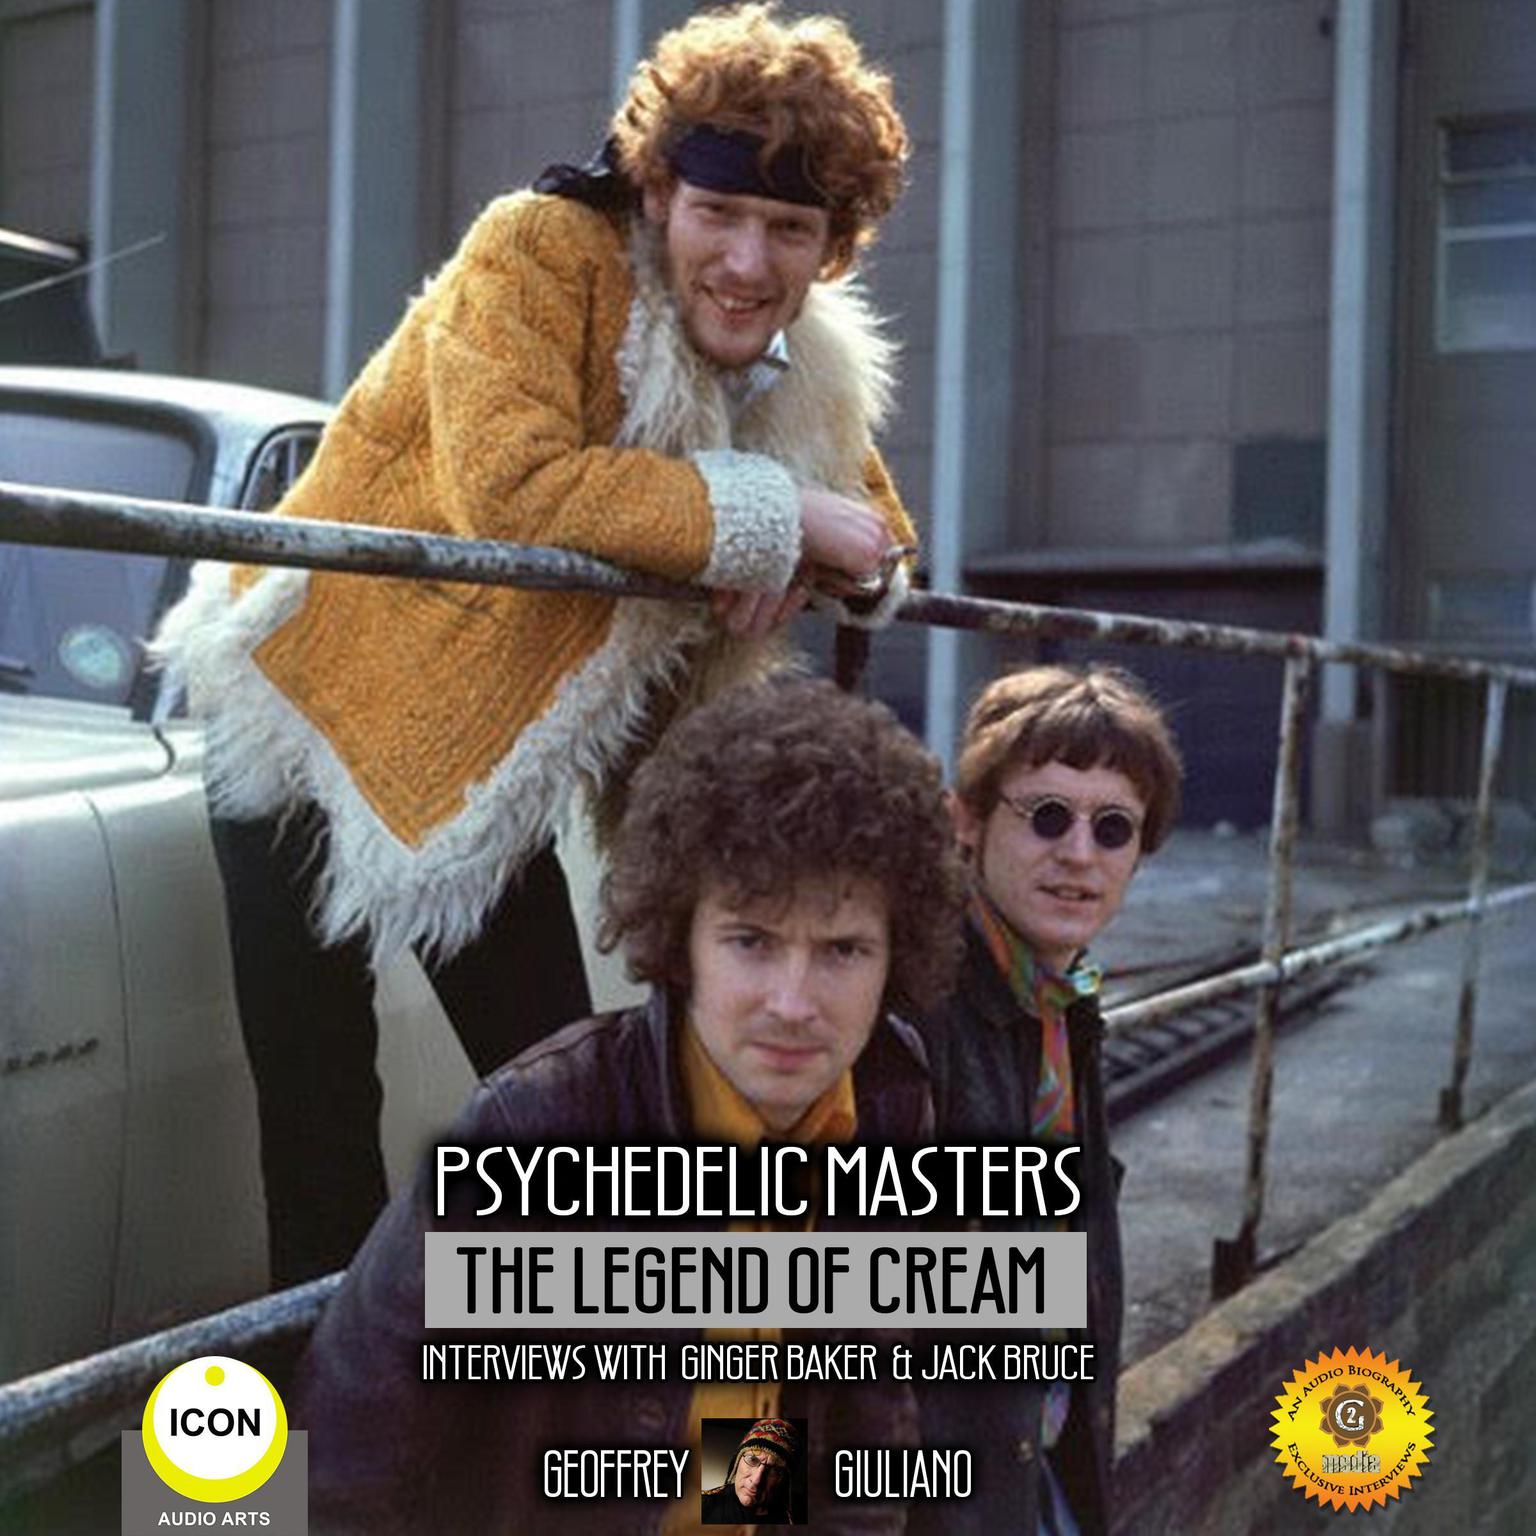 Psychedelic Masters - The Legend Of Cream Interviews With Ginger Baker  & Jack Bruce Audiobook, by Geoffrey Giuliano